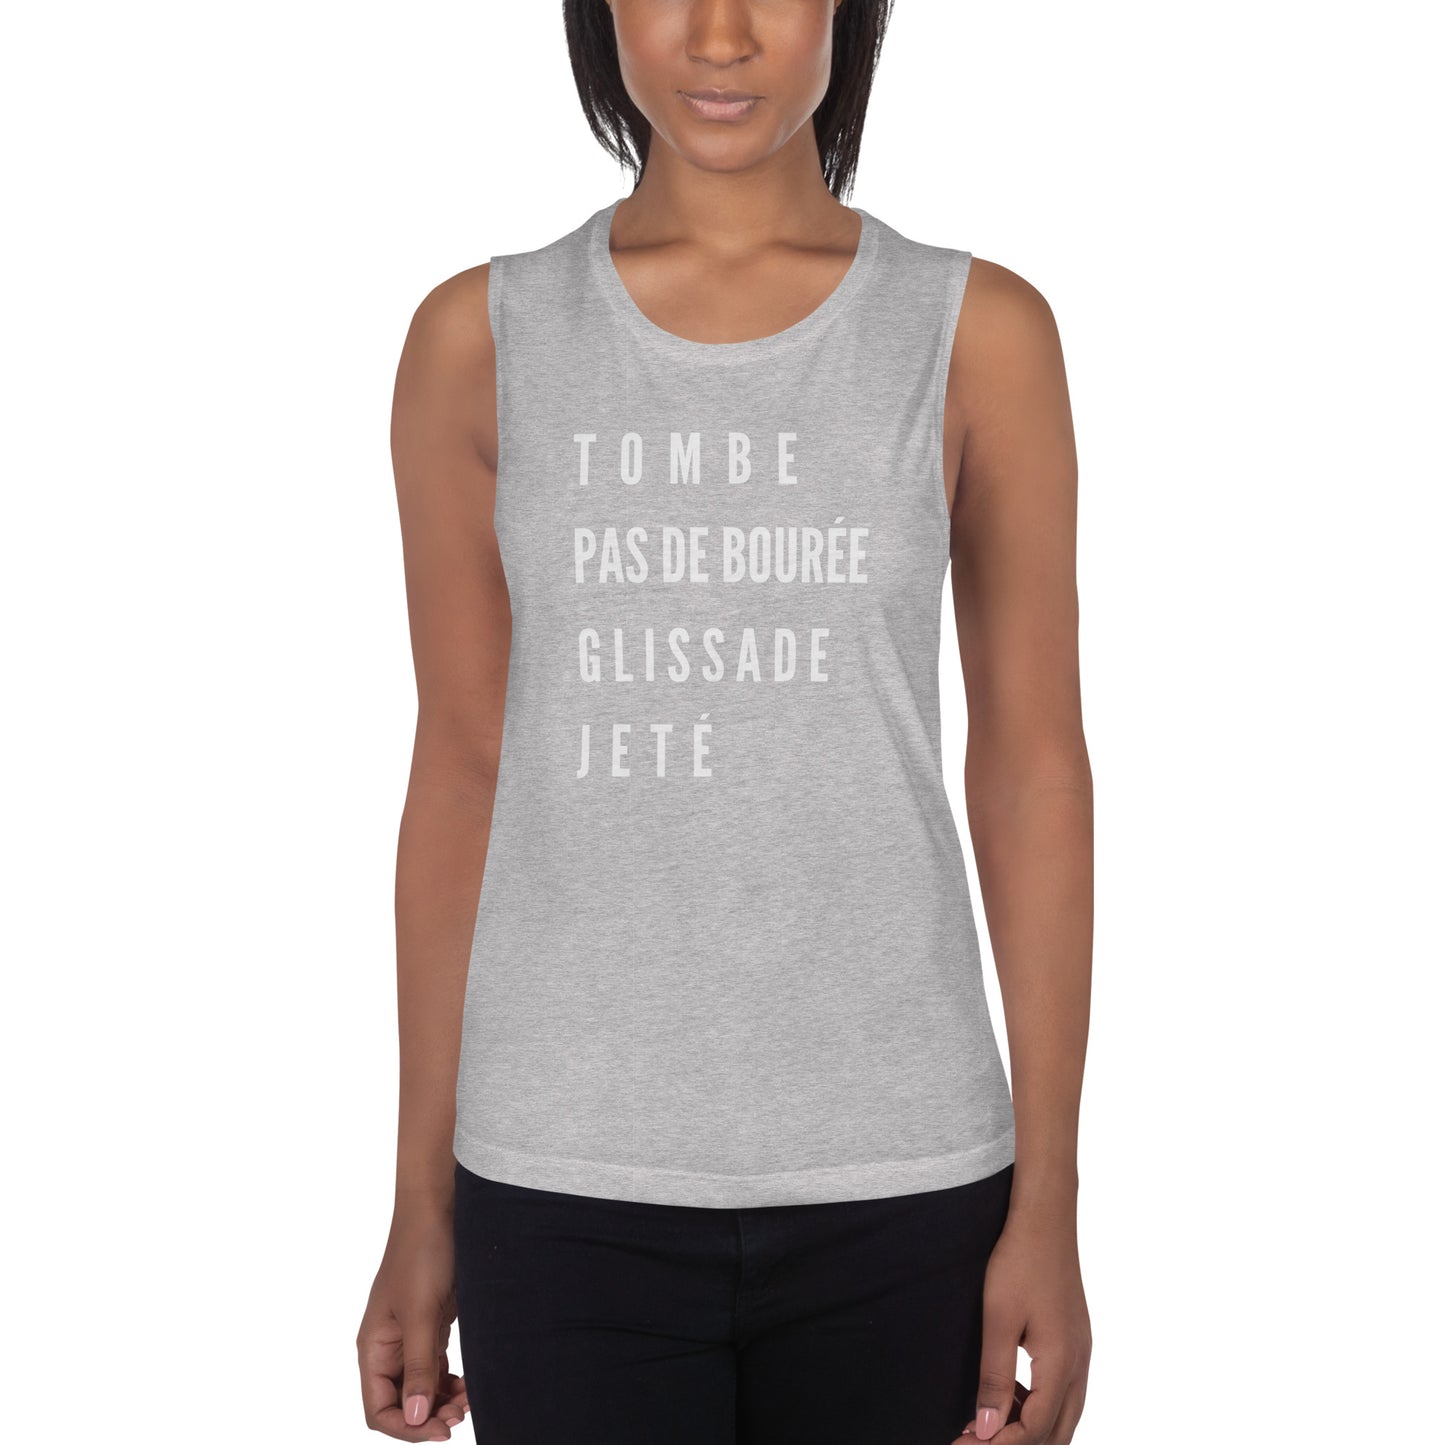 Ladies’ TPGJ white lettered Muscle Tank